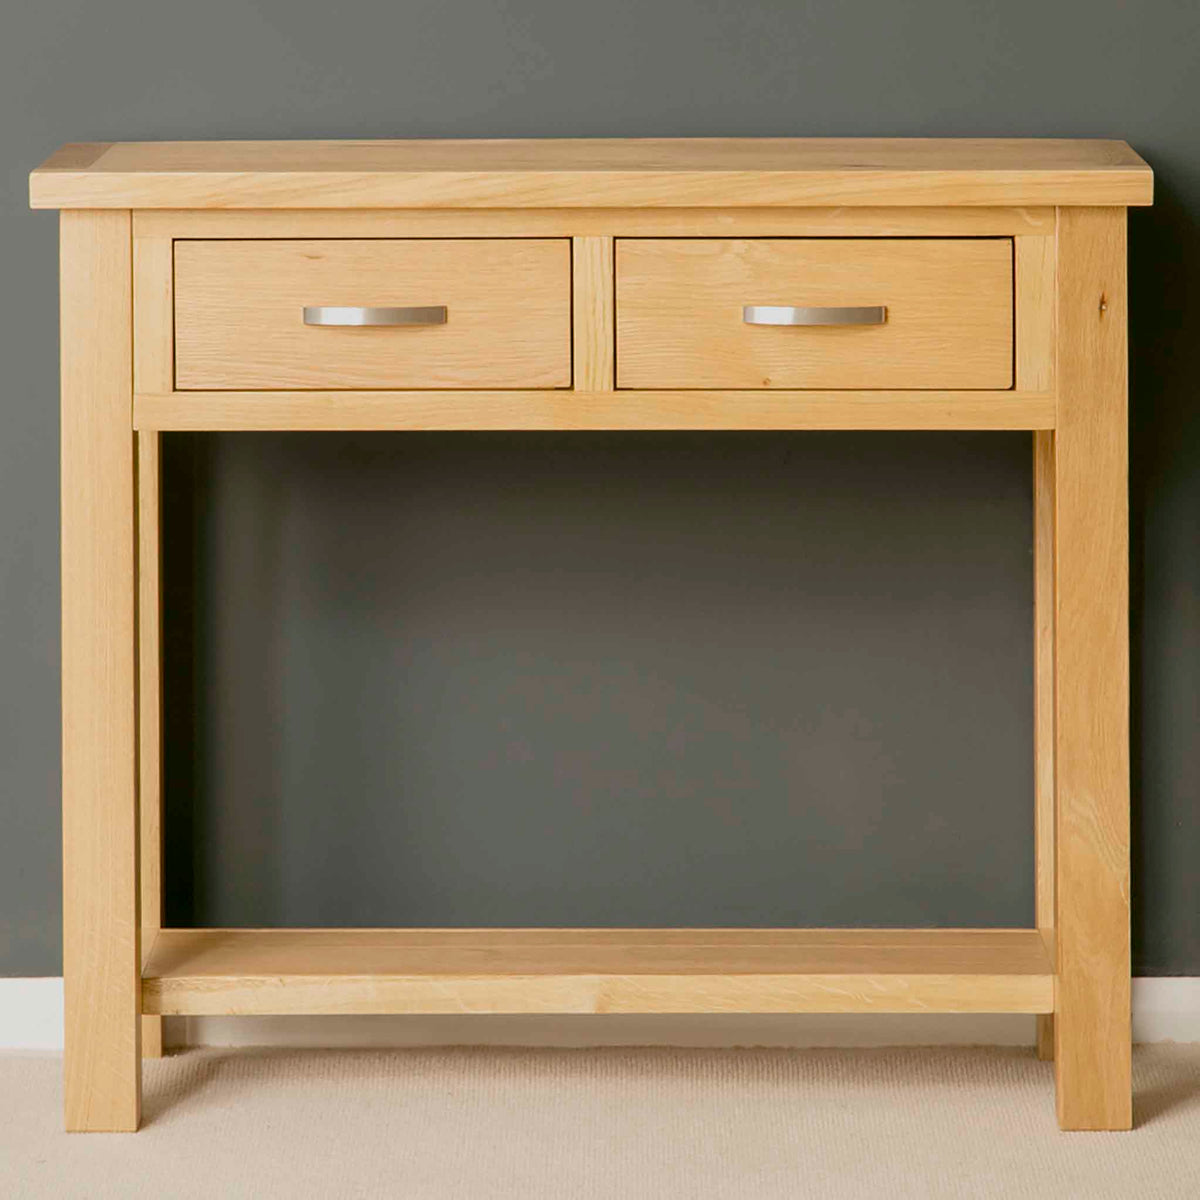 The London Oak Console Table by Roseland Furniture